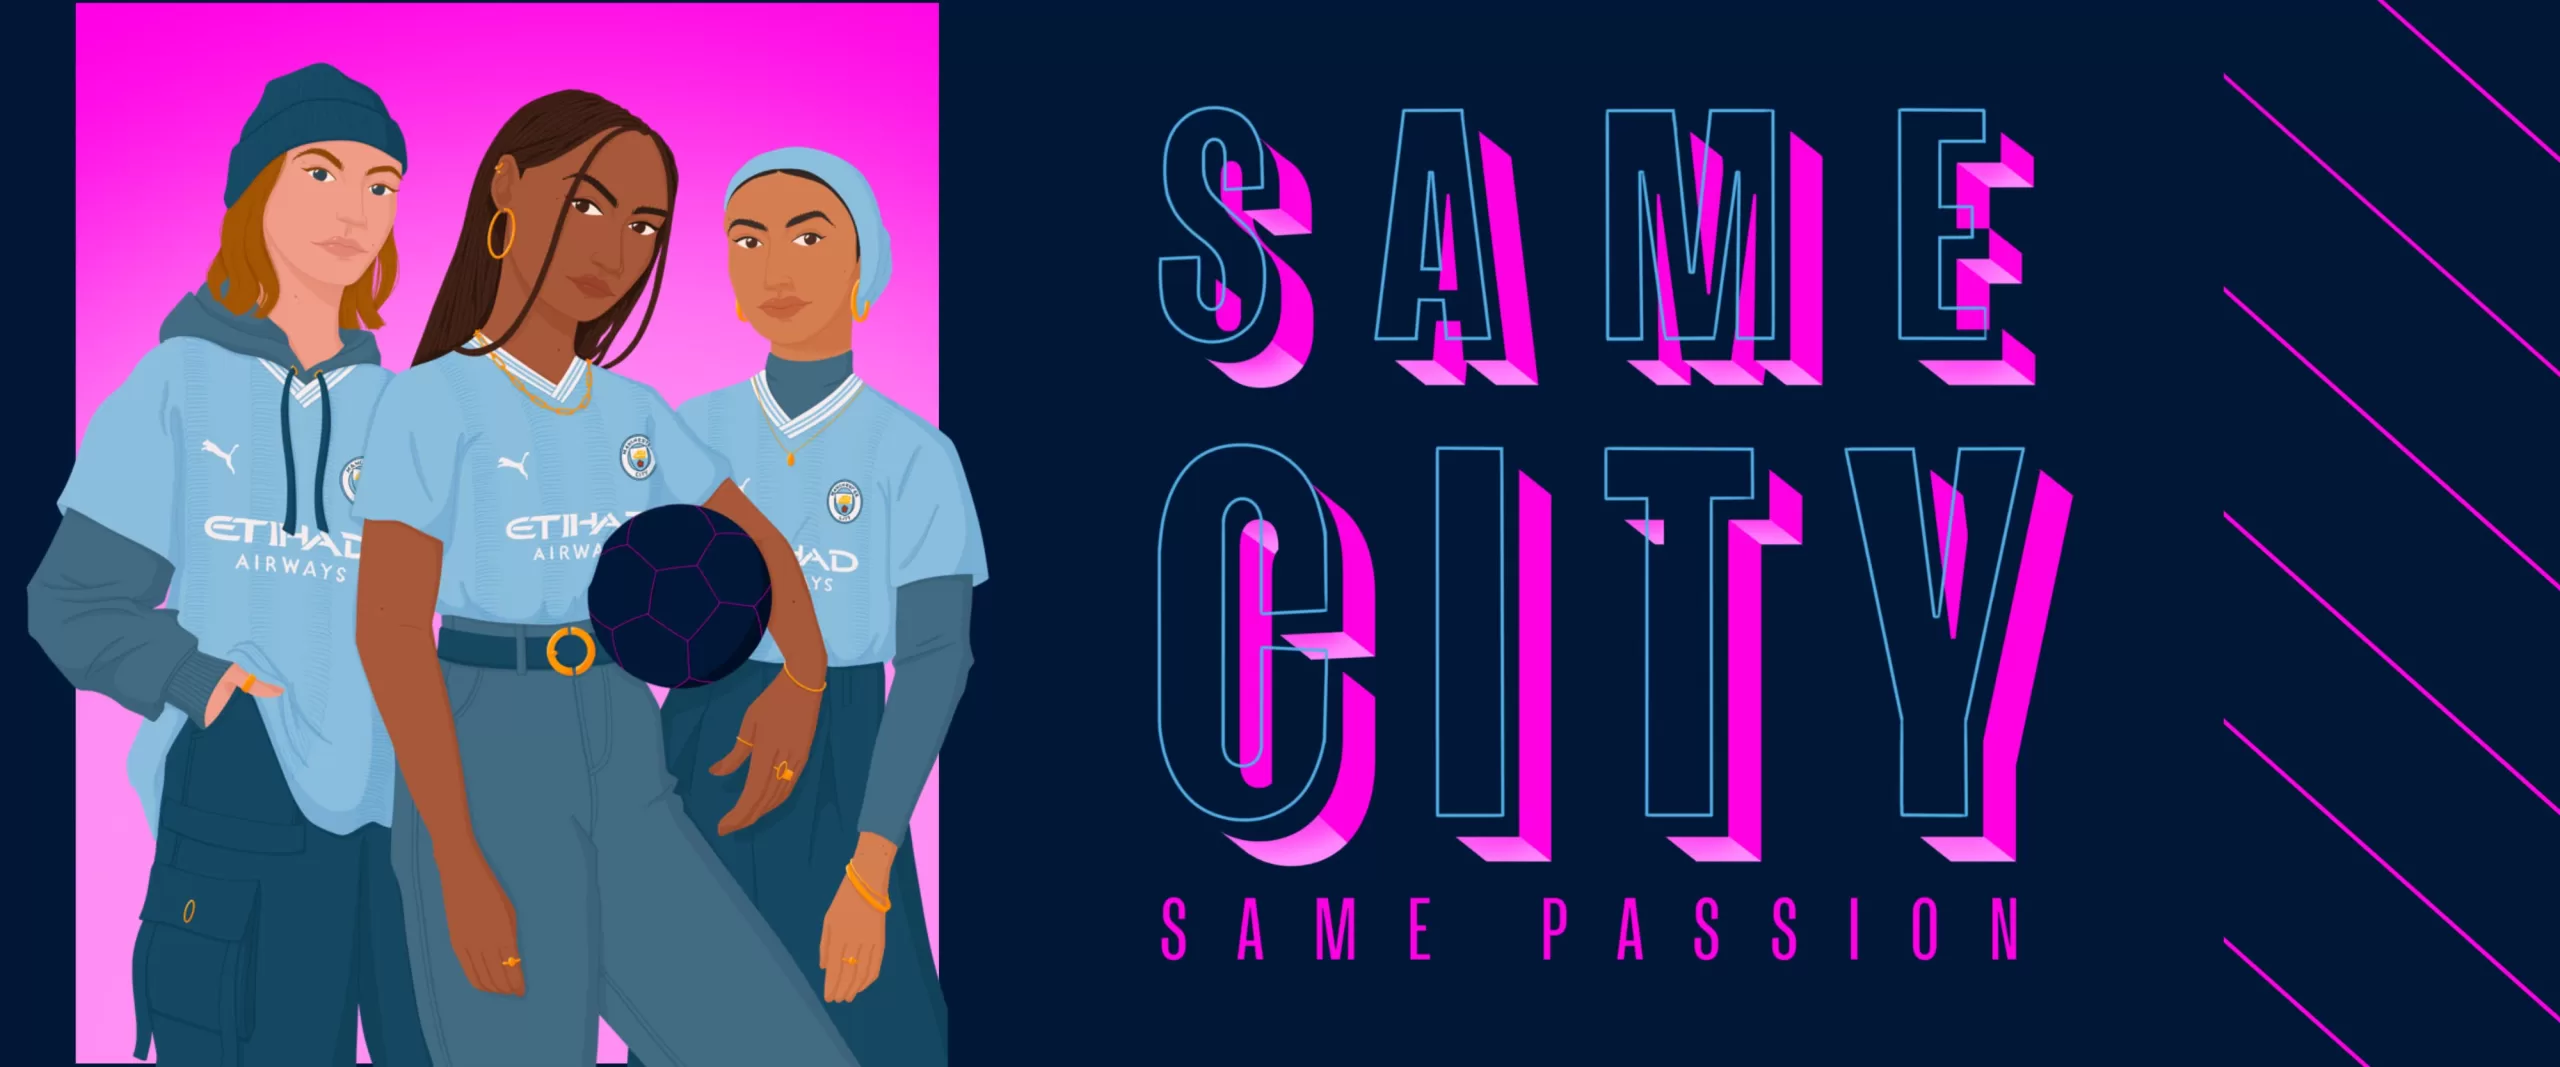 Same City Same Passion by Power of Women x Man City